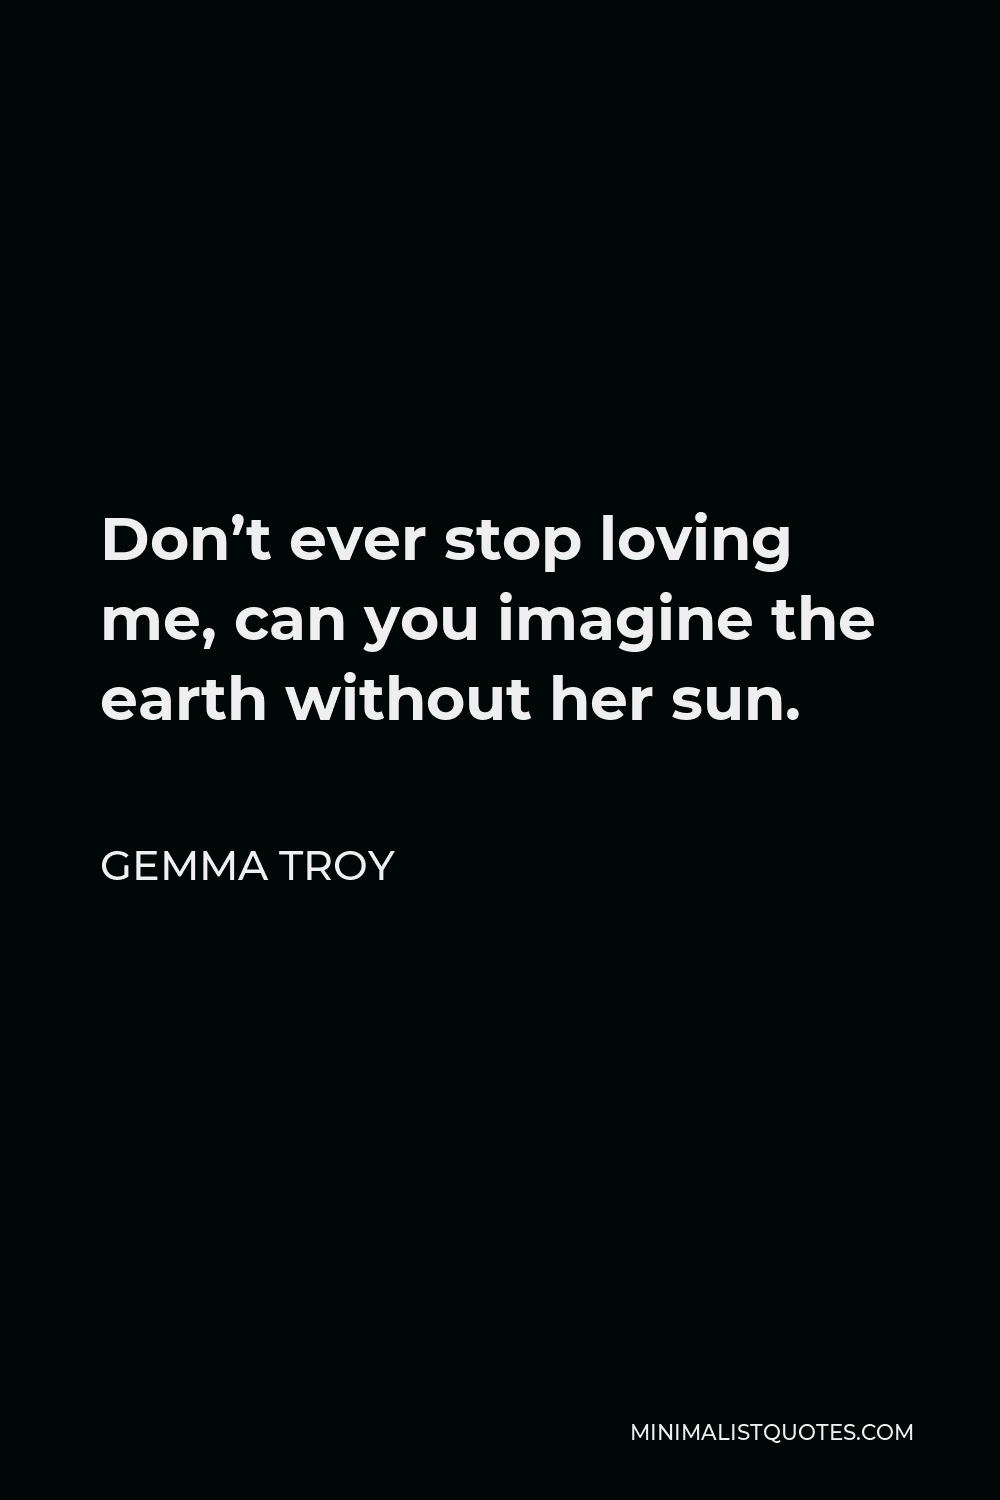 Gemma Troy Quote - Don’t ever stop loving me, can you imagine the earth without her sun.